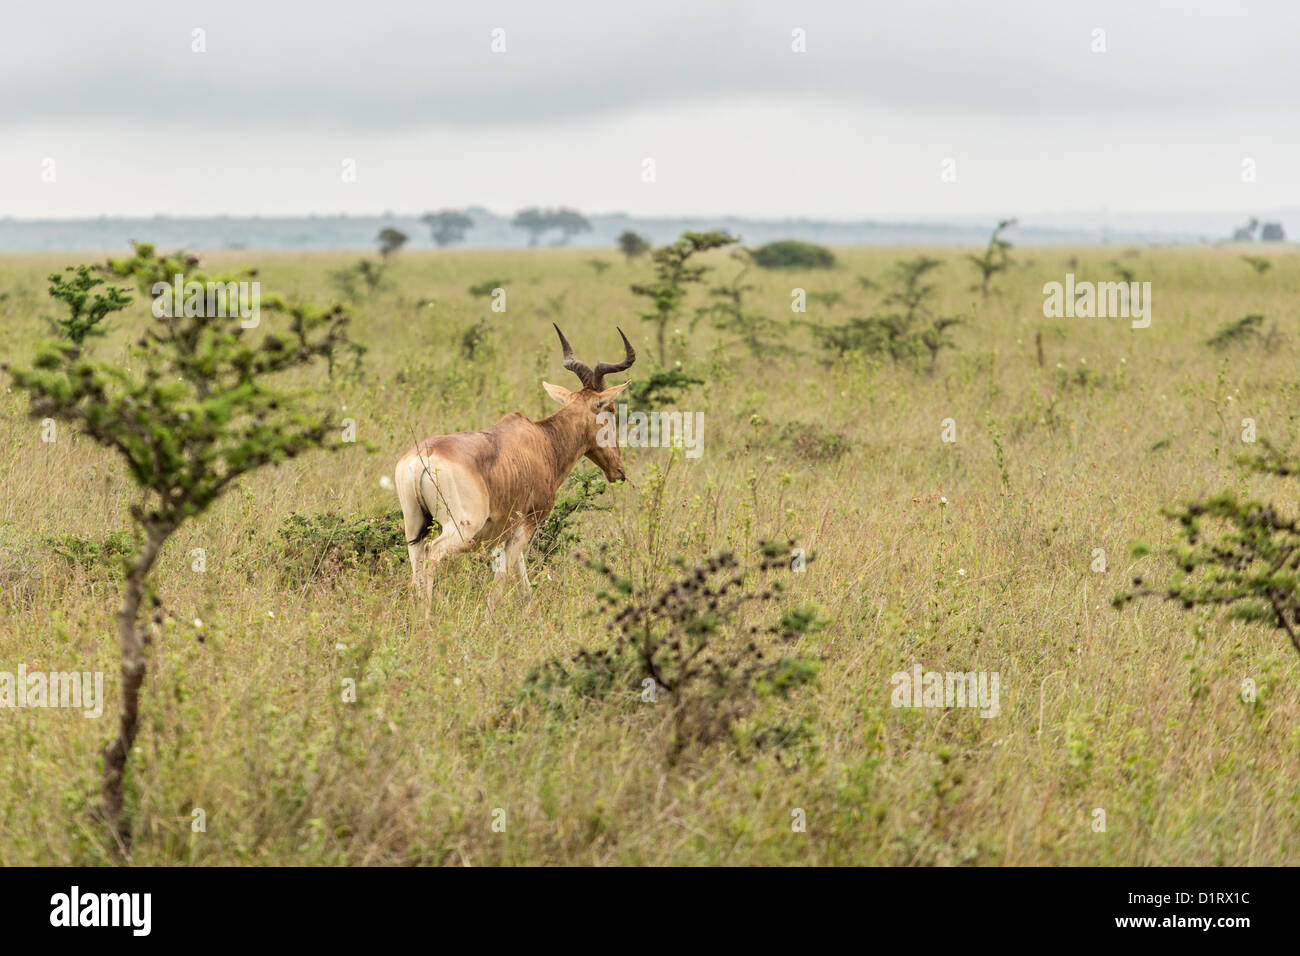 An impala in the grasslands of the Nairobi National Park Stock Photo